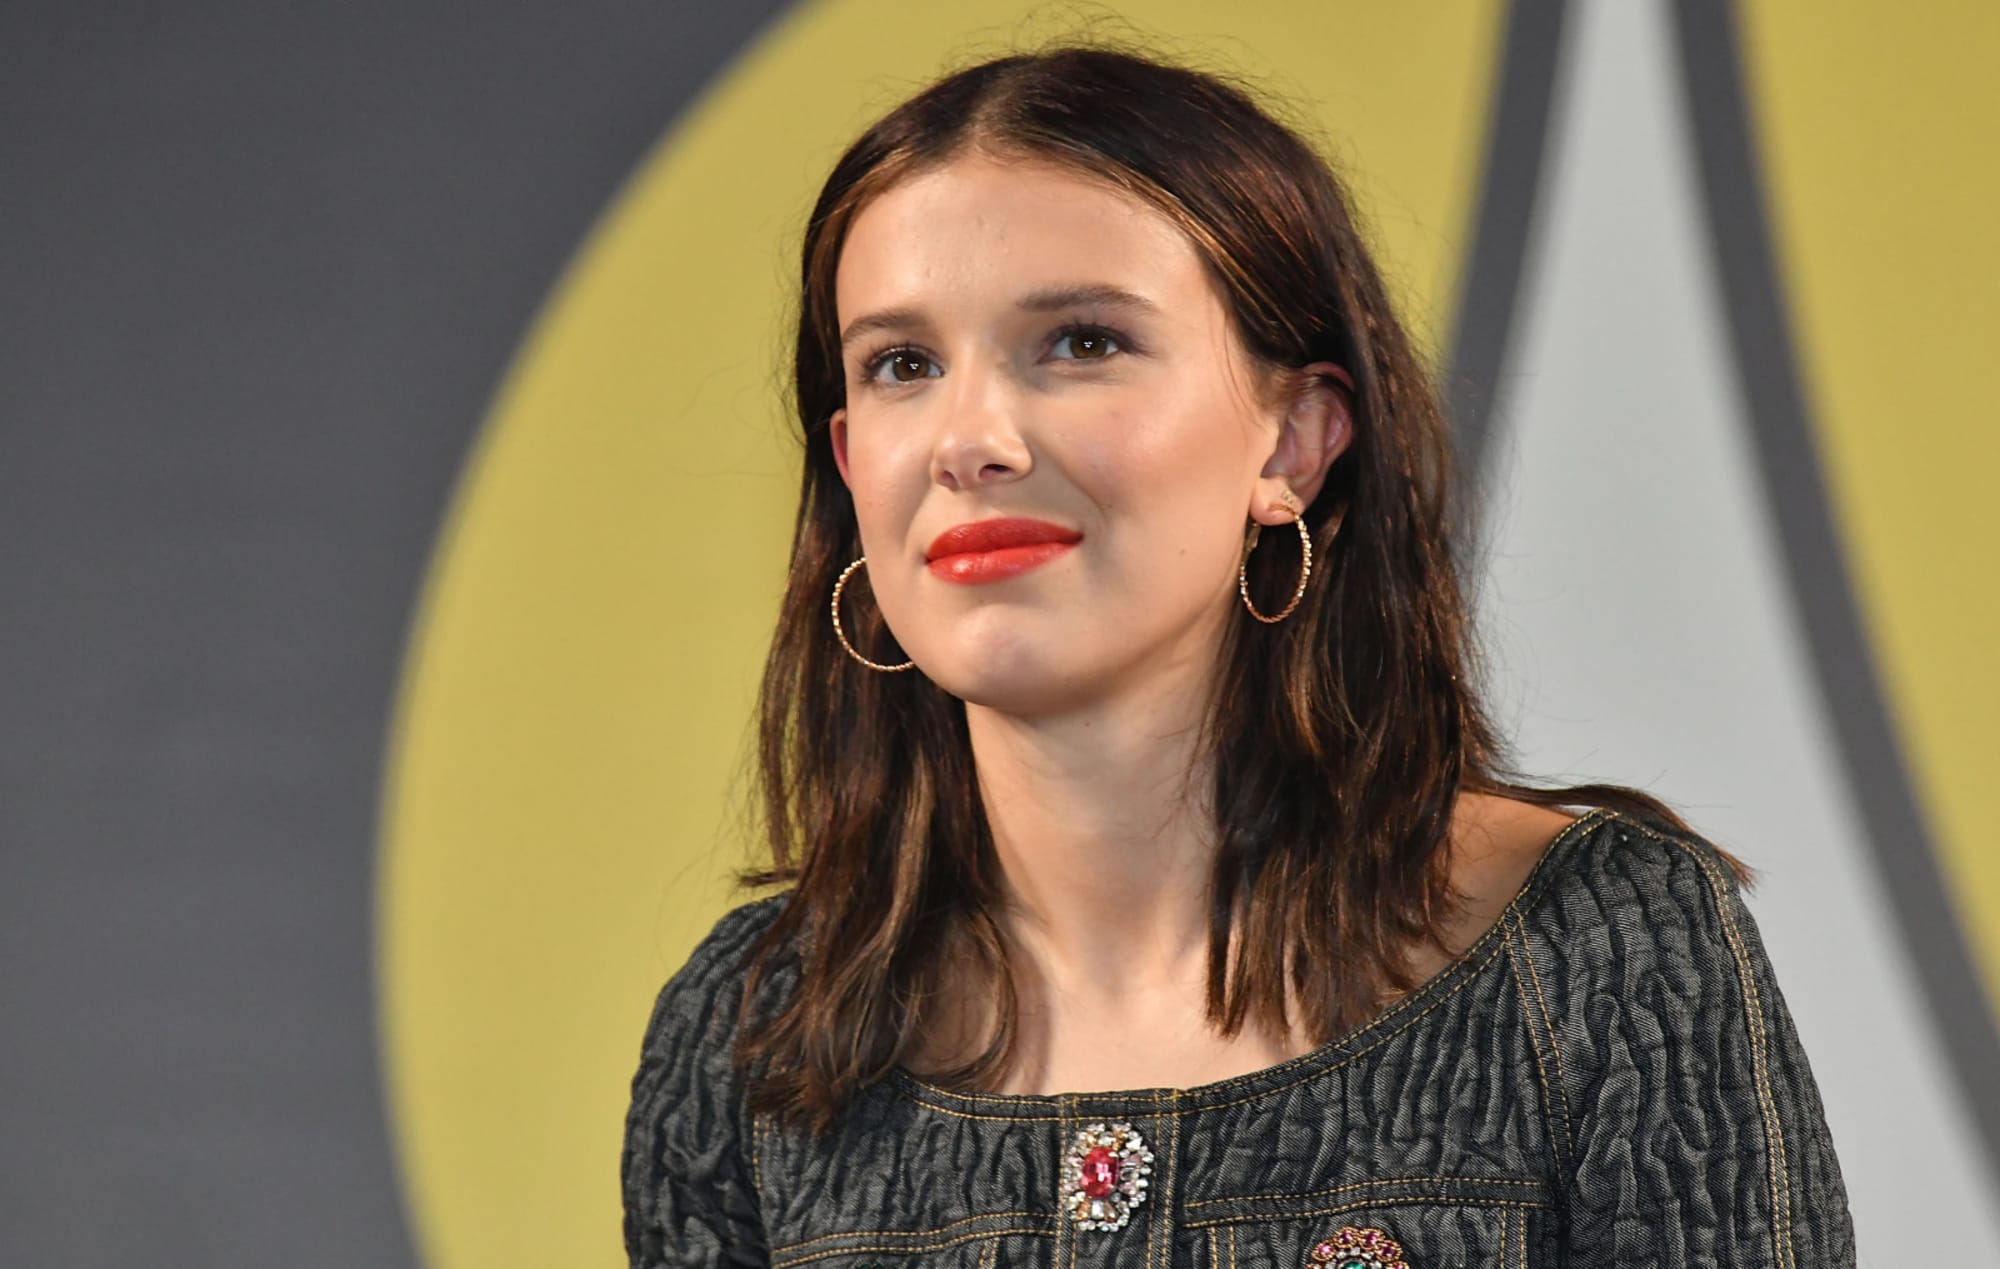 Millie Bobby Brown Says She's Ready to Move on From Stranger Things